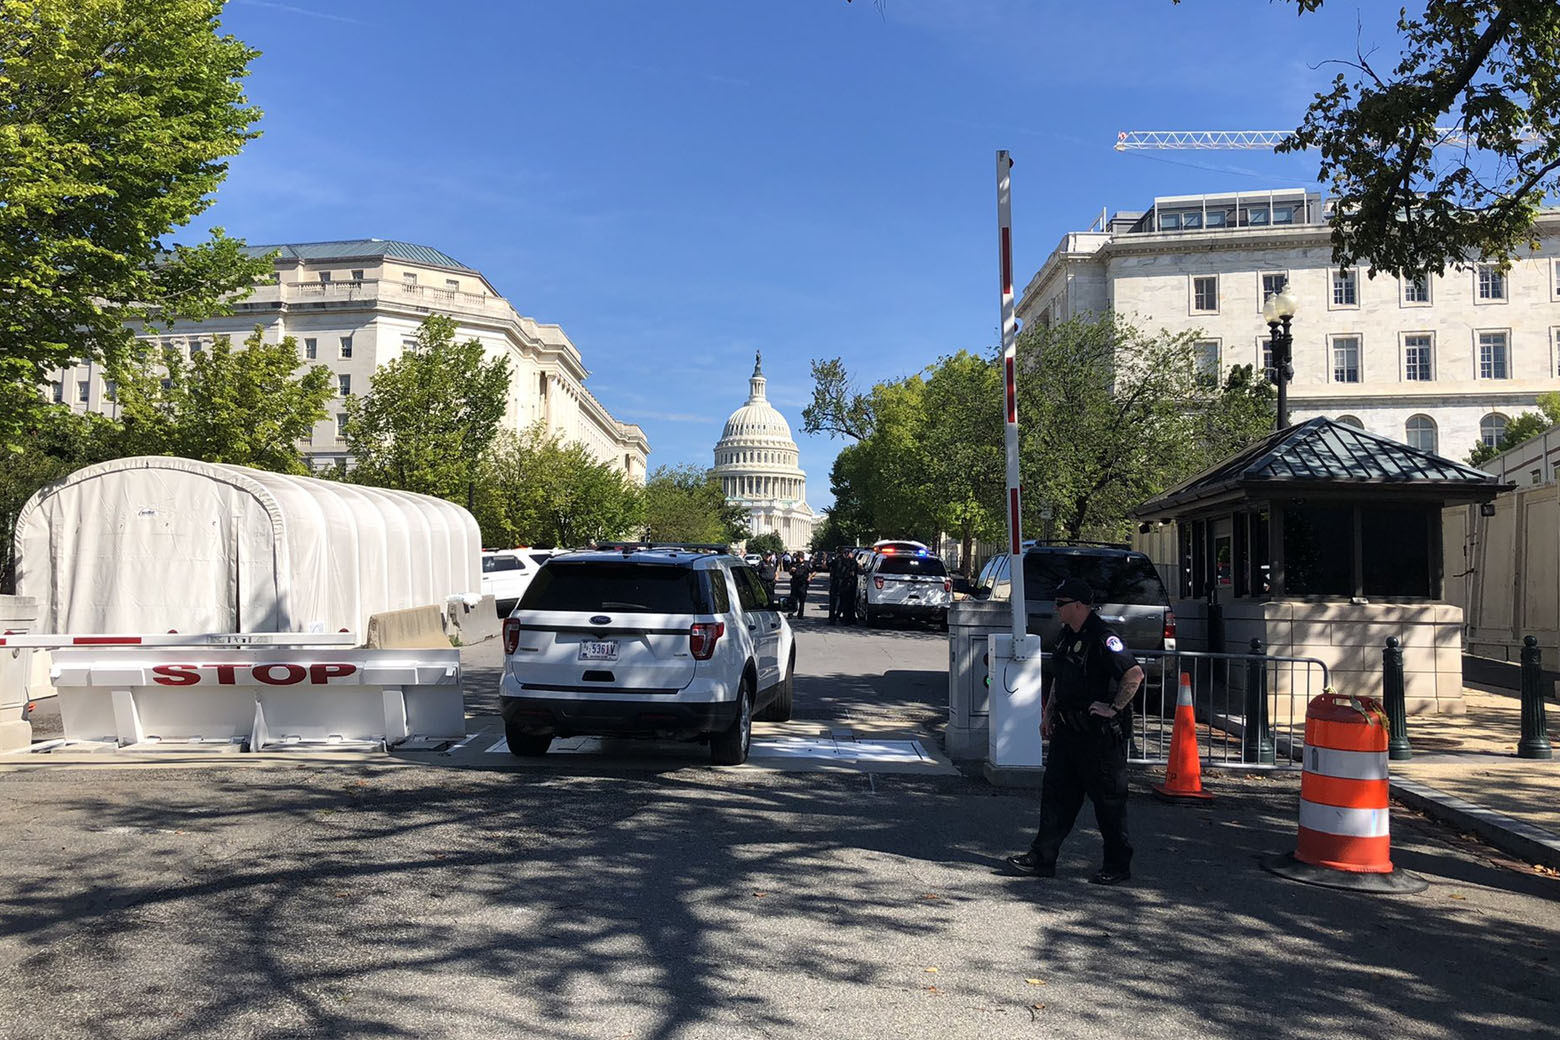 Capitol Police blocked vehicles from driviing near the Capitol Thursday morning. (WTOP/Mitchell Miller)